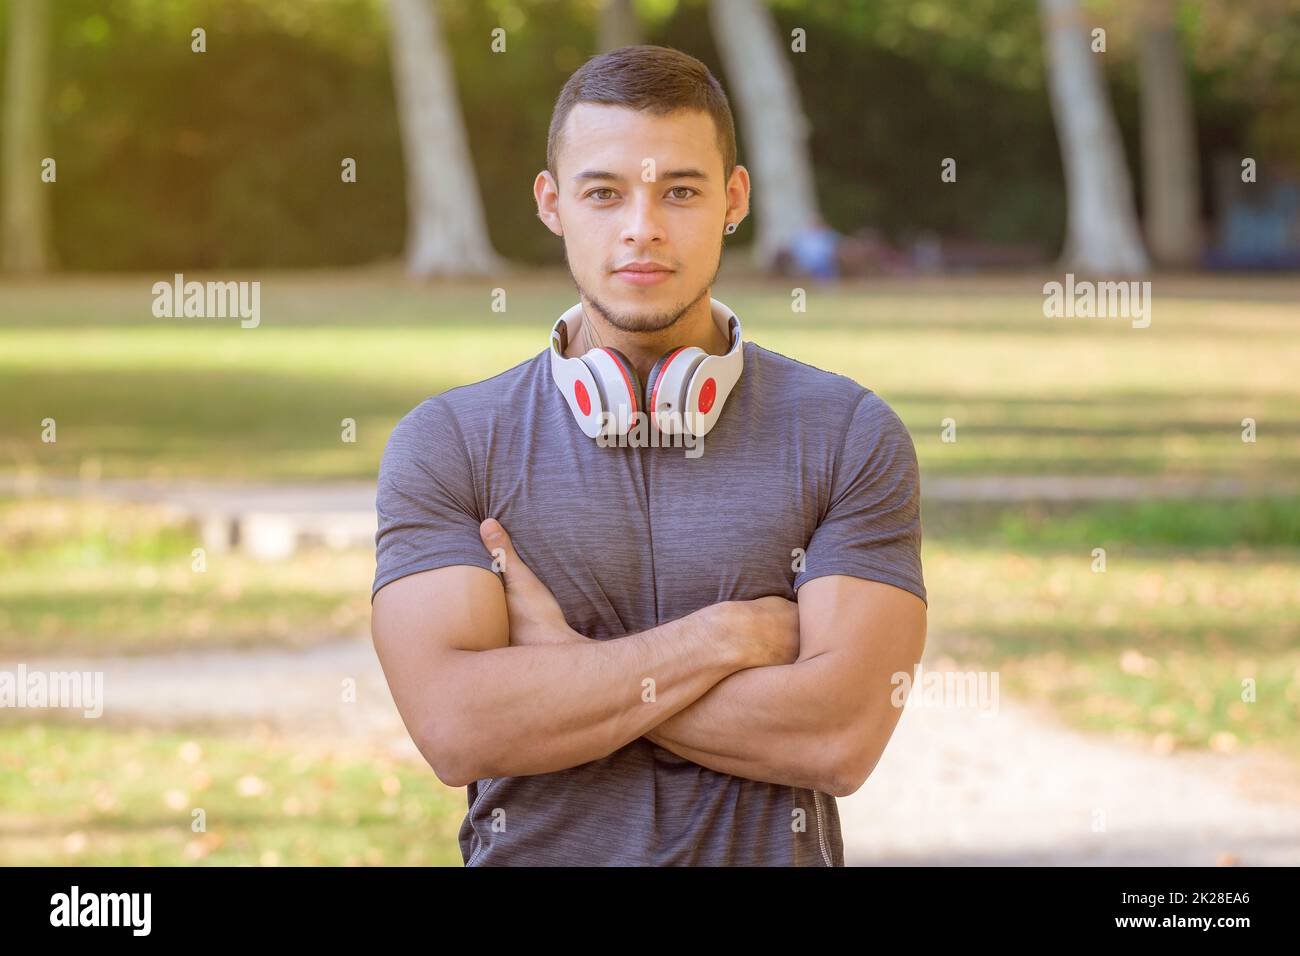 Sports training fitness young latin man runner workout in a park Stock Photo